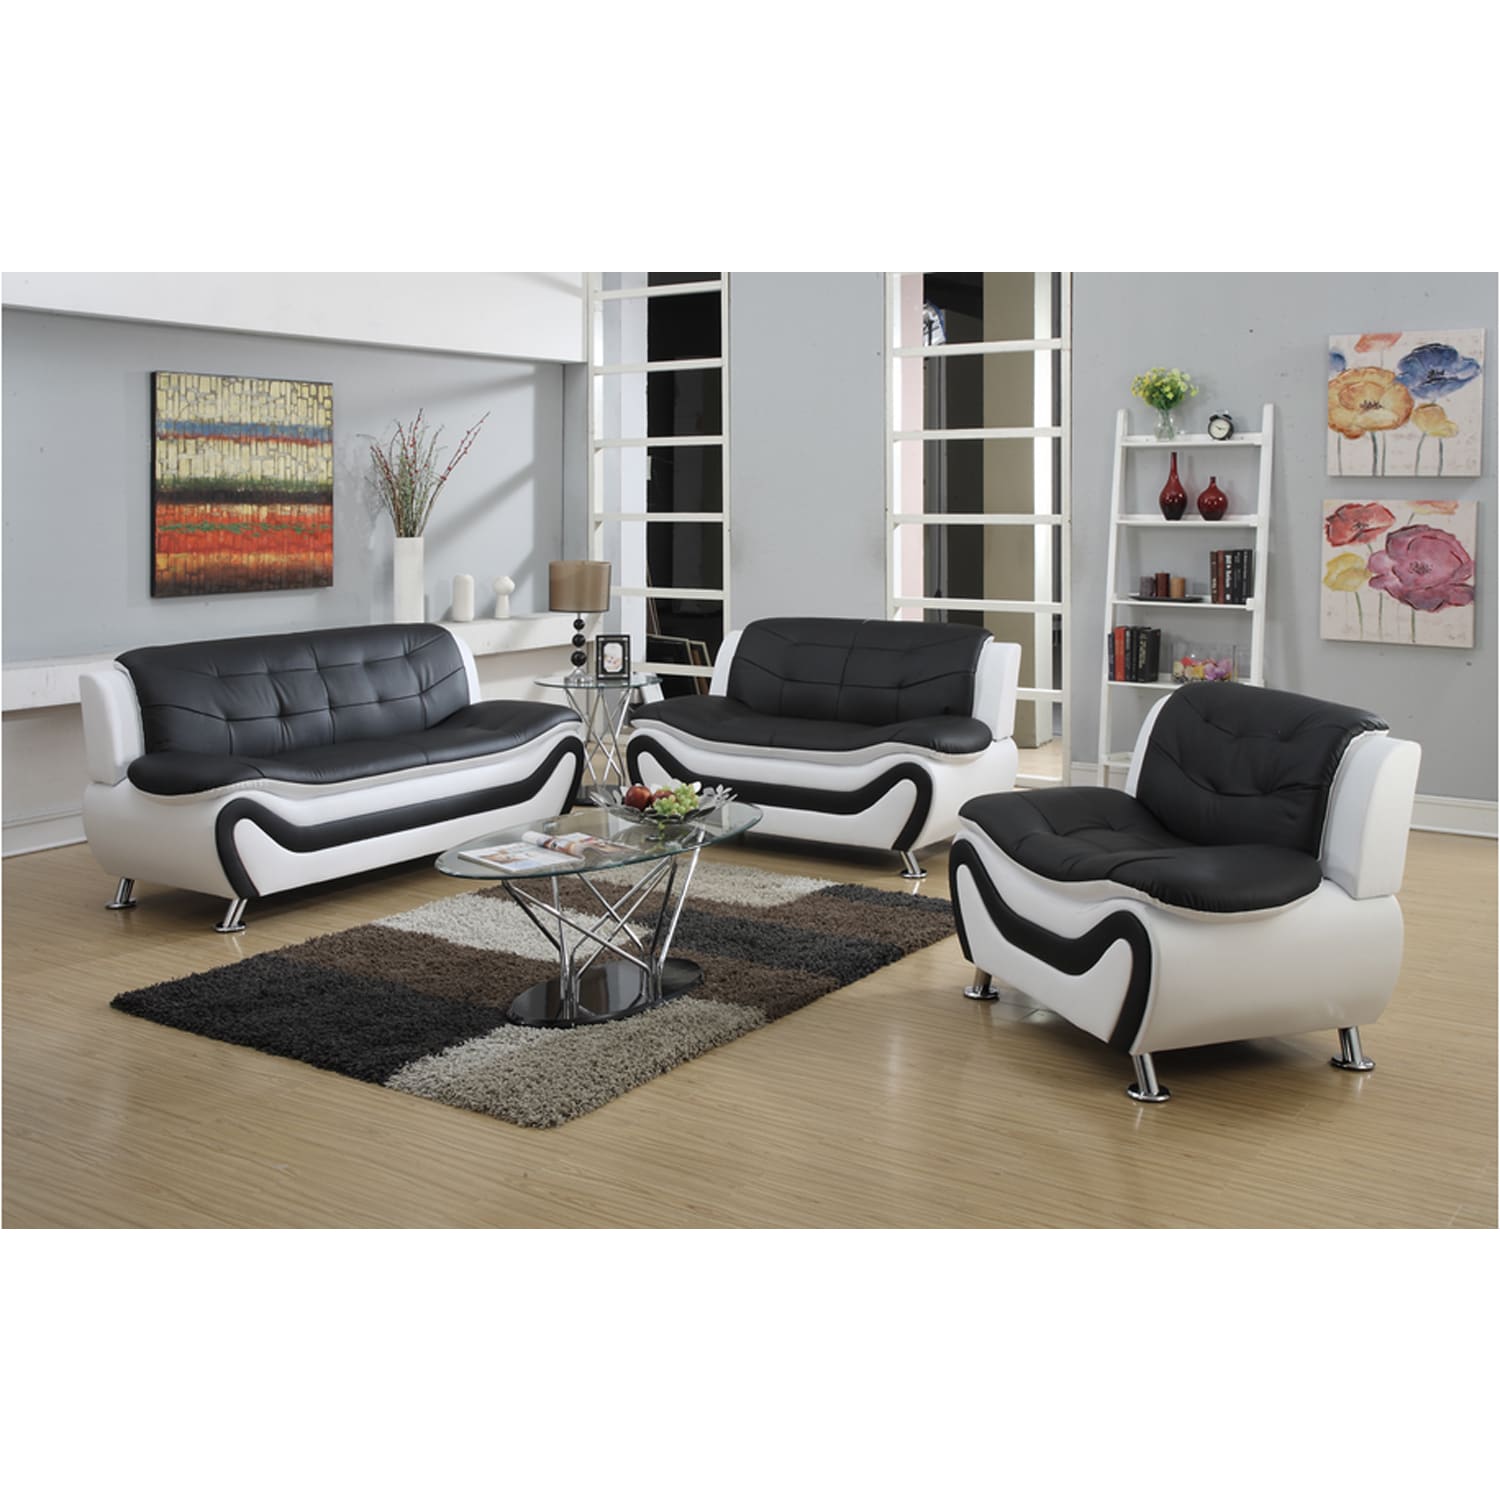 Tiffany Modern Faux Leather Living Room Sofa Set Overstock 12981039